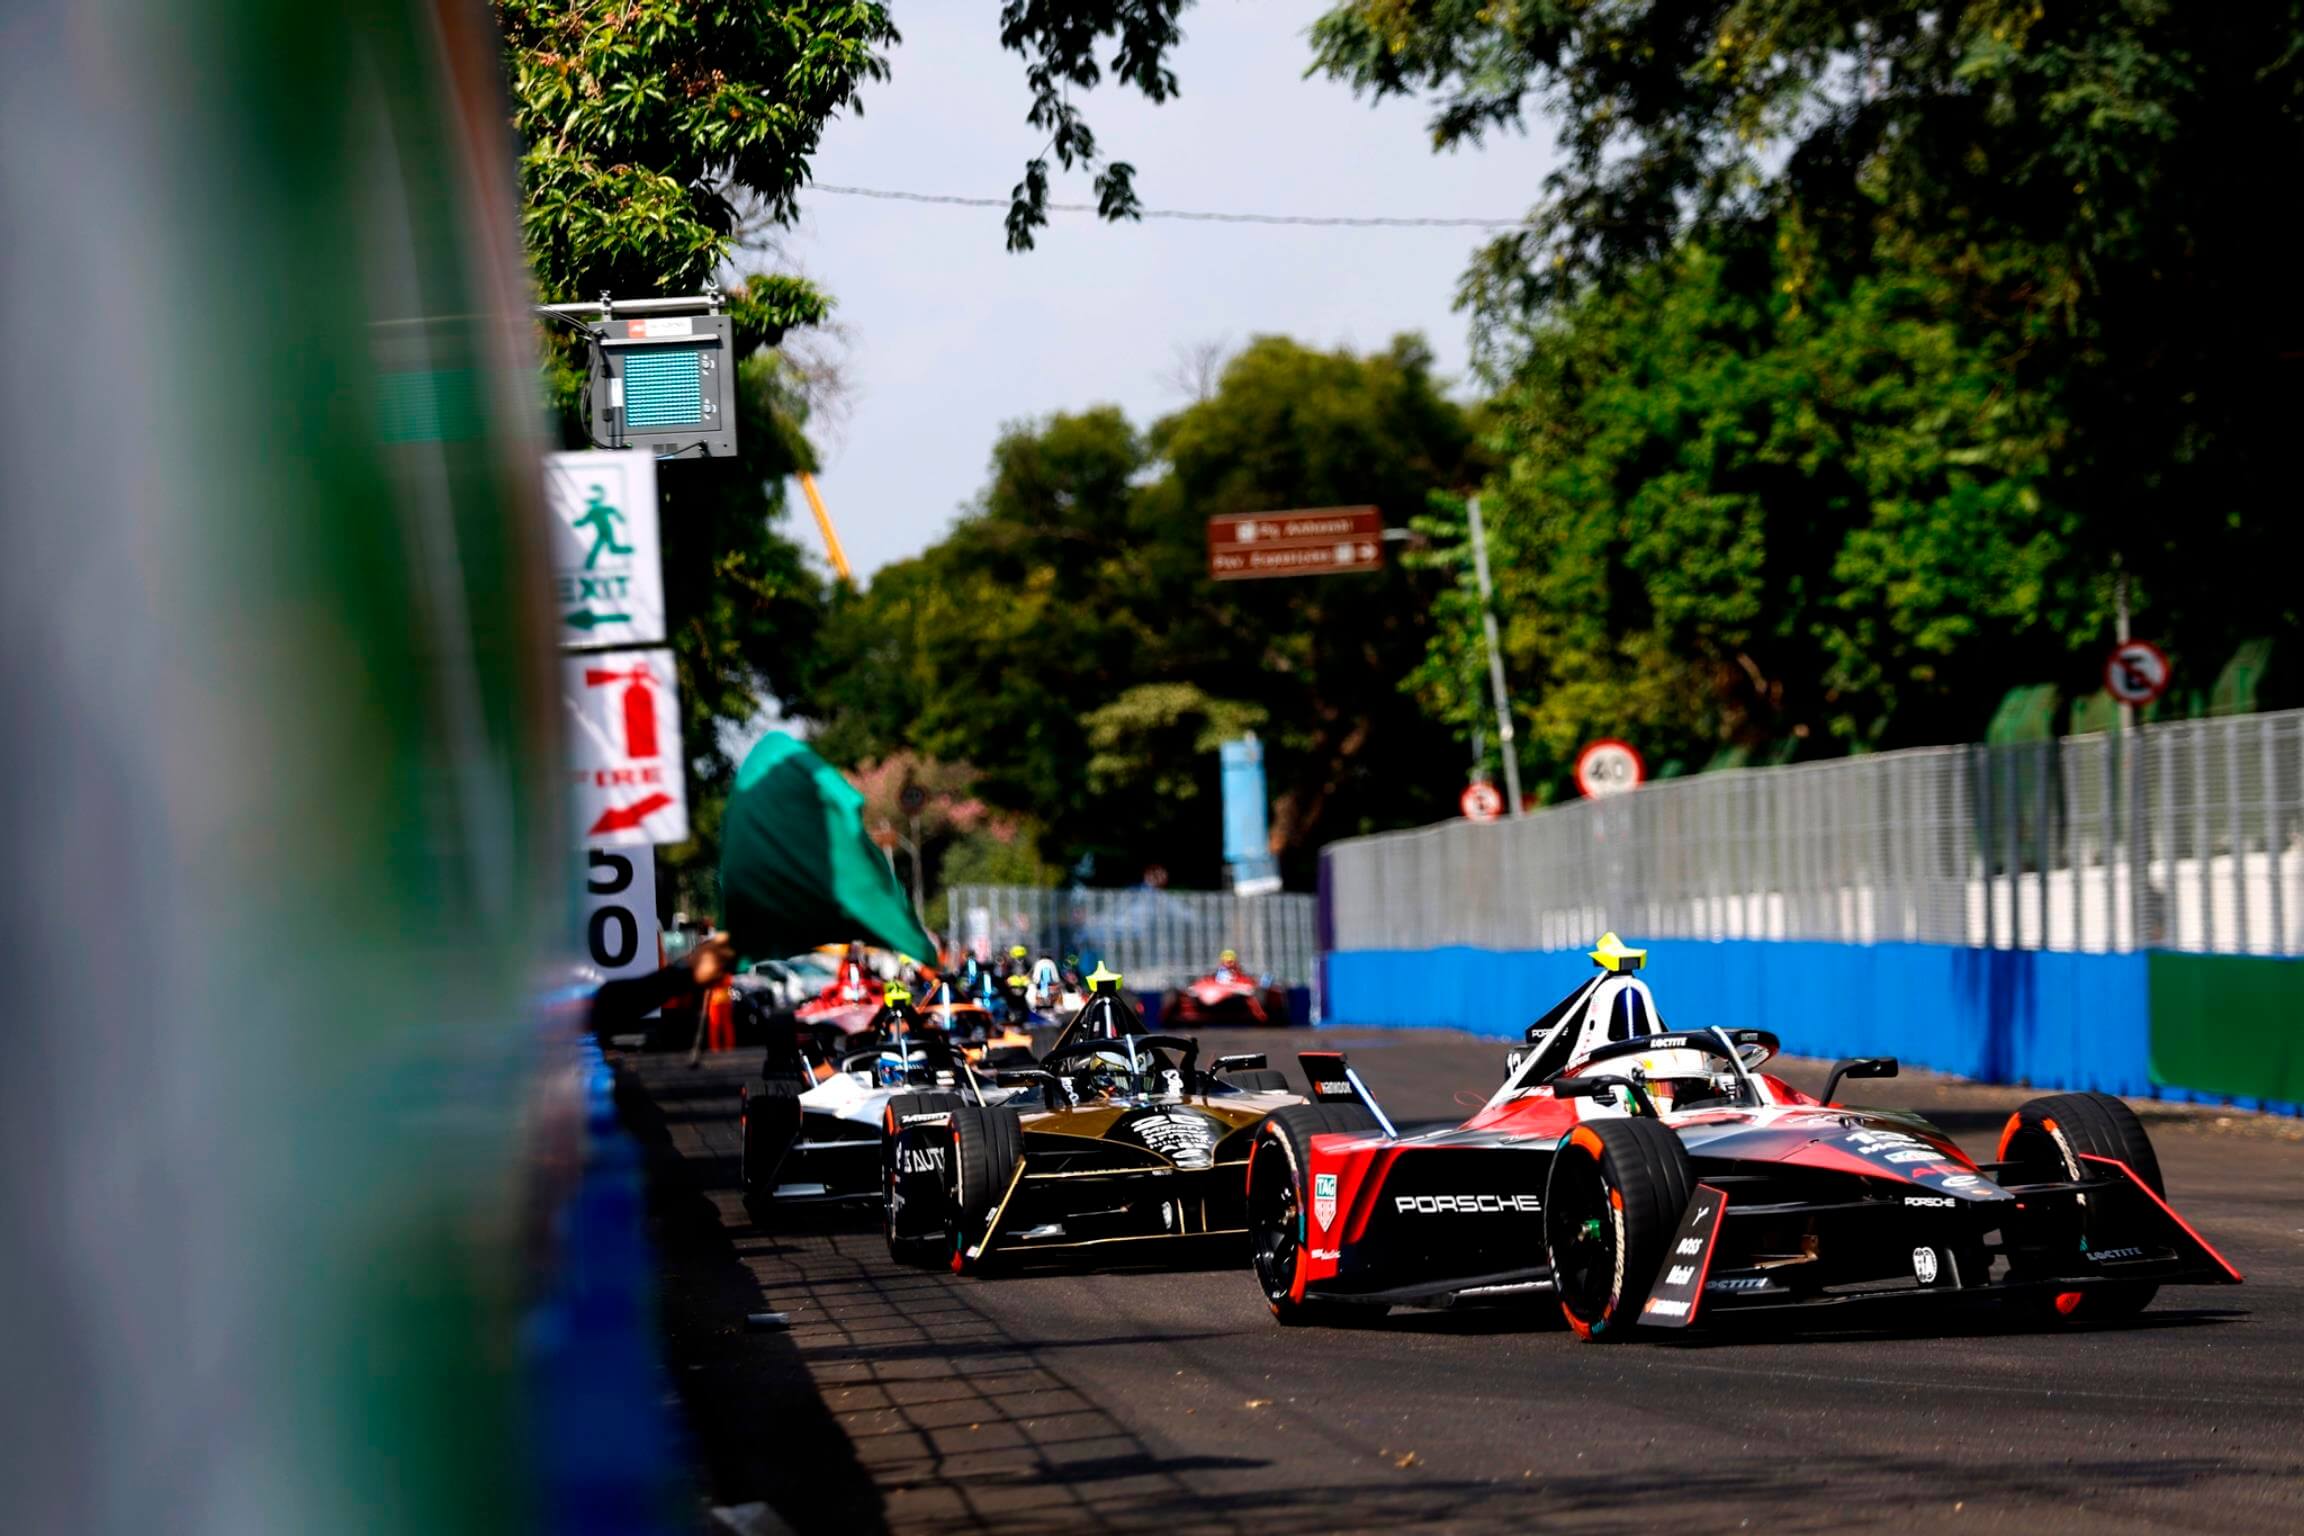 Rumour: Formula E could be shown on new free TV channel DF1 in Germany in 2024